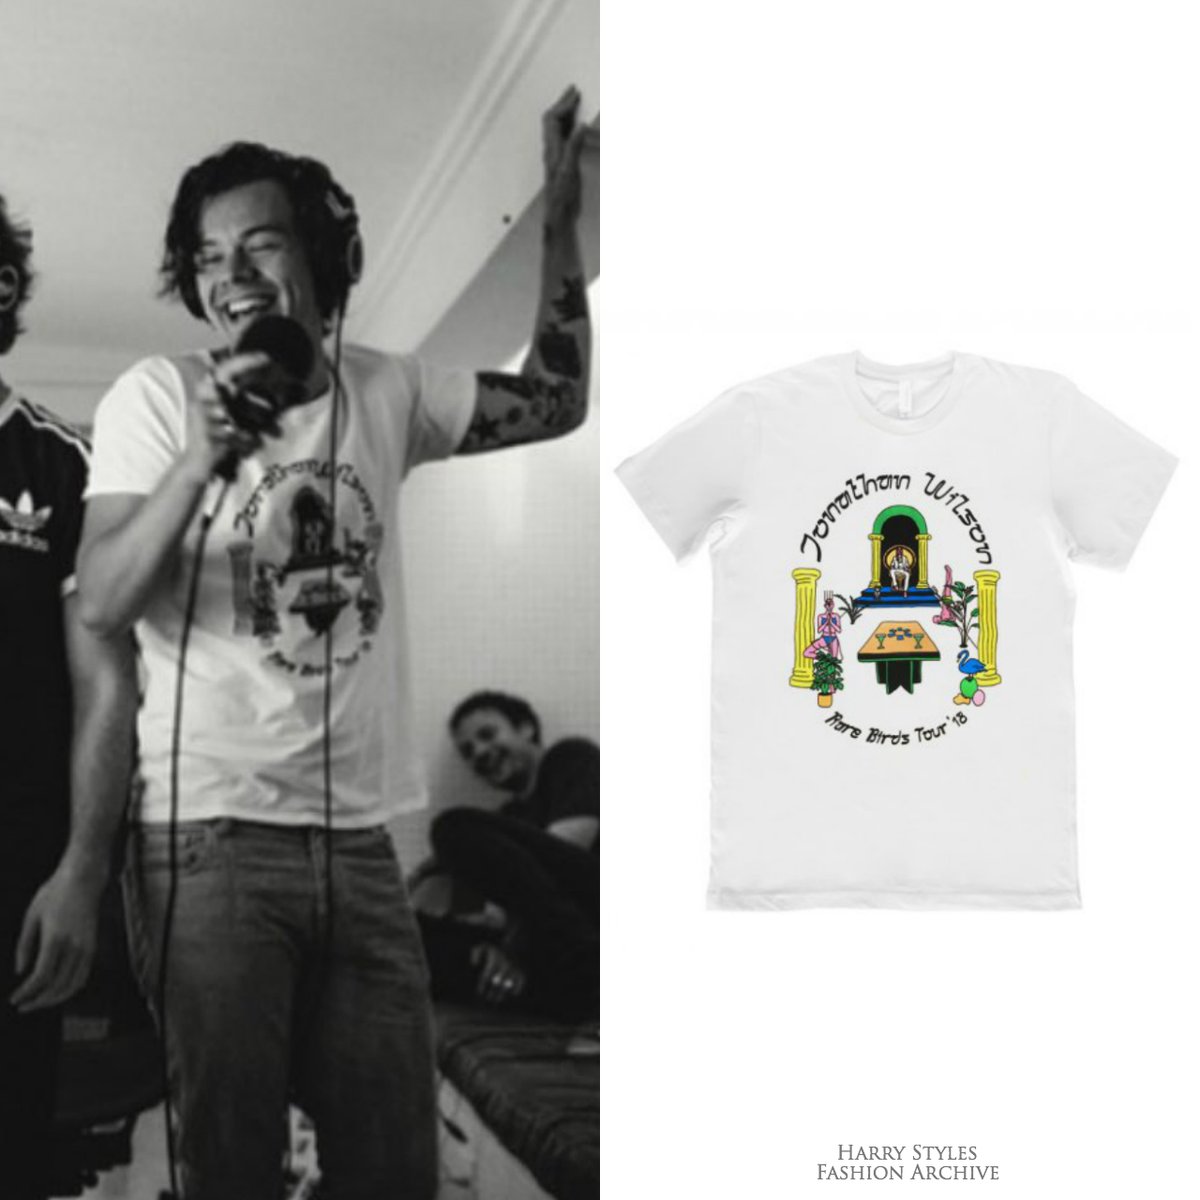 Harry Styles Fashion Archive on Twitter: "Harry wore a limited edition @songsofjw “Rare Birds Tour” t-shirt in the Line album booklet. / Twitter